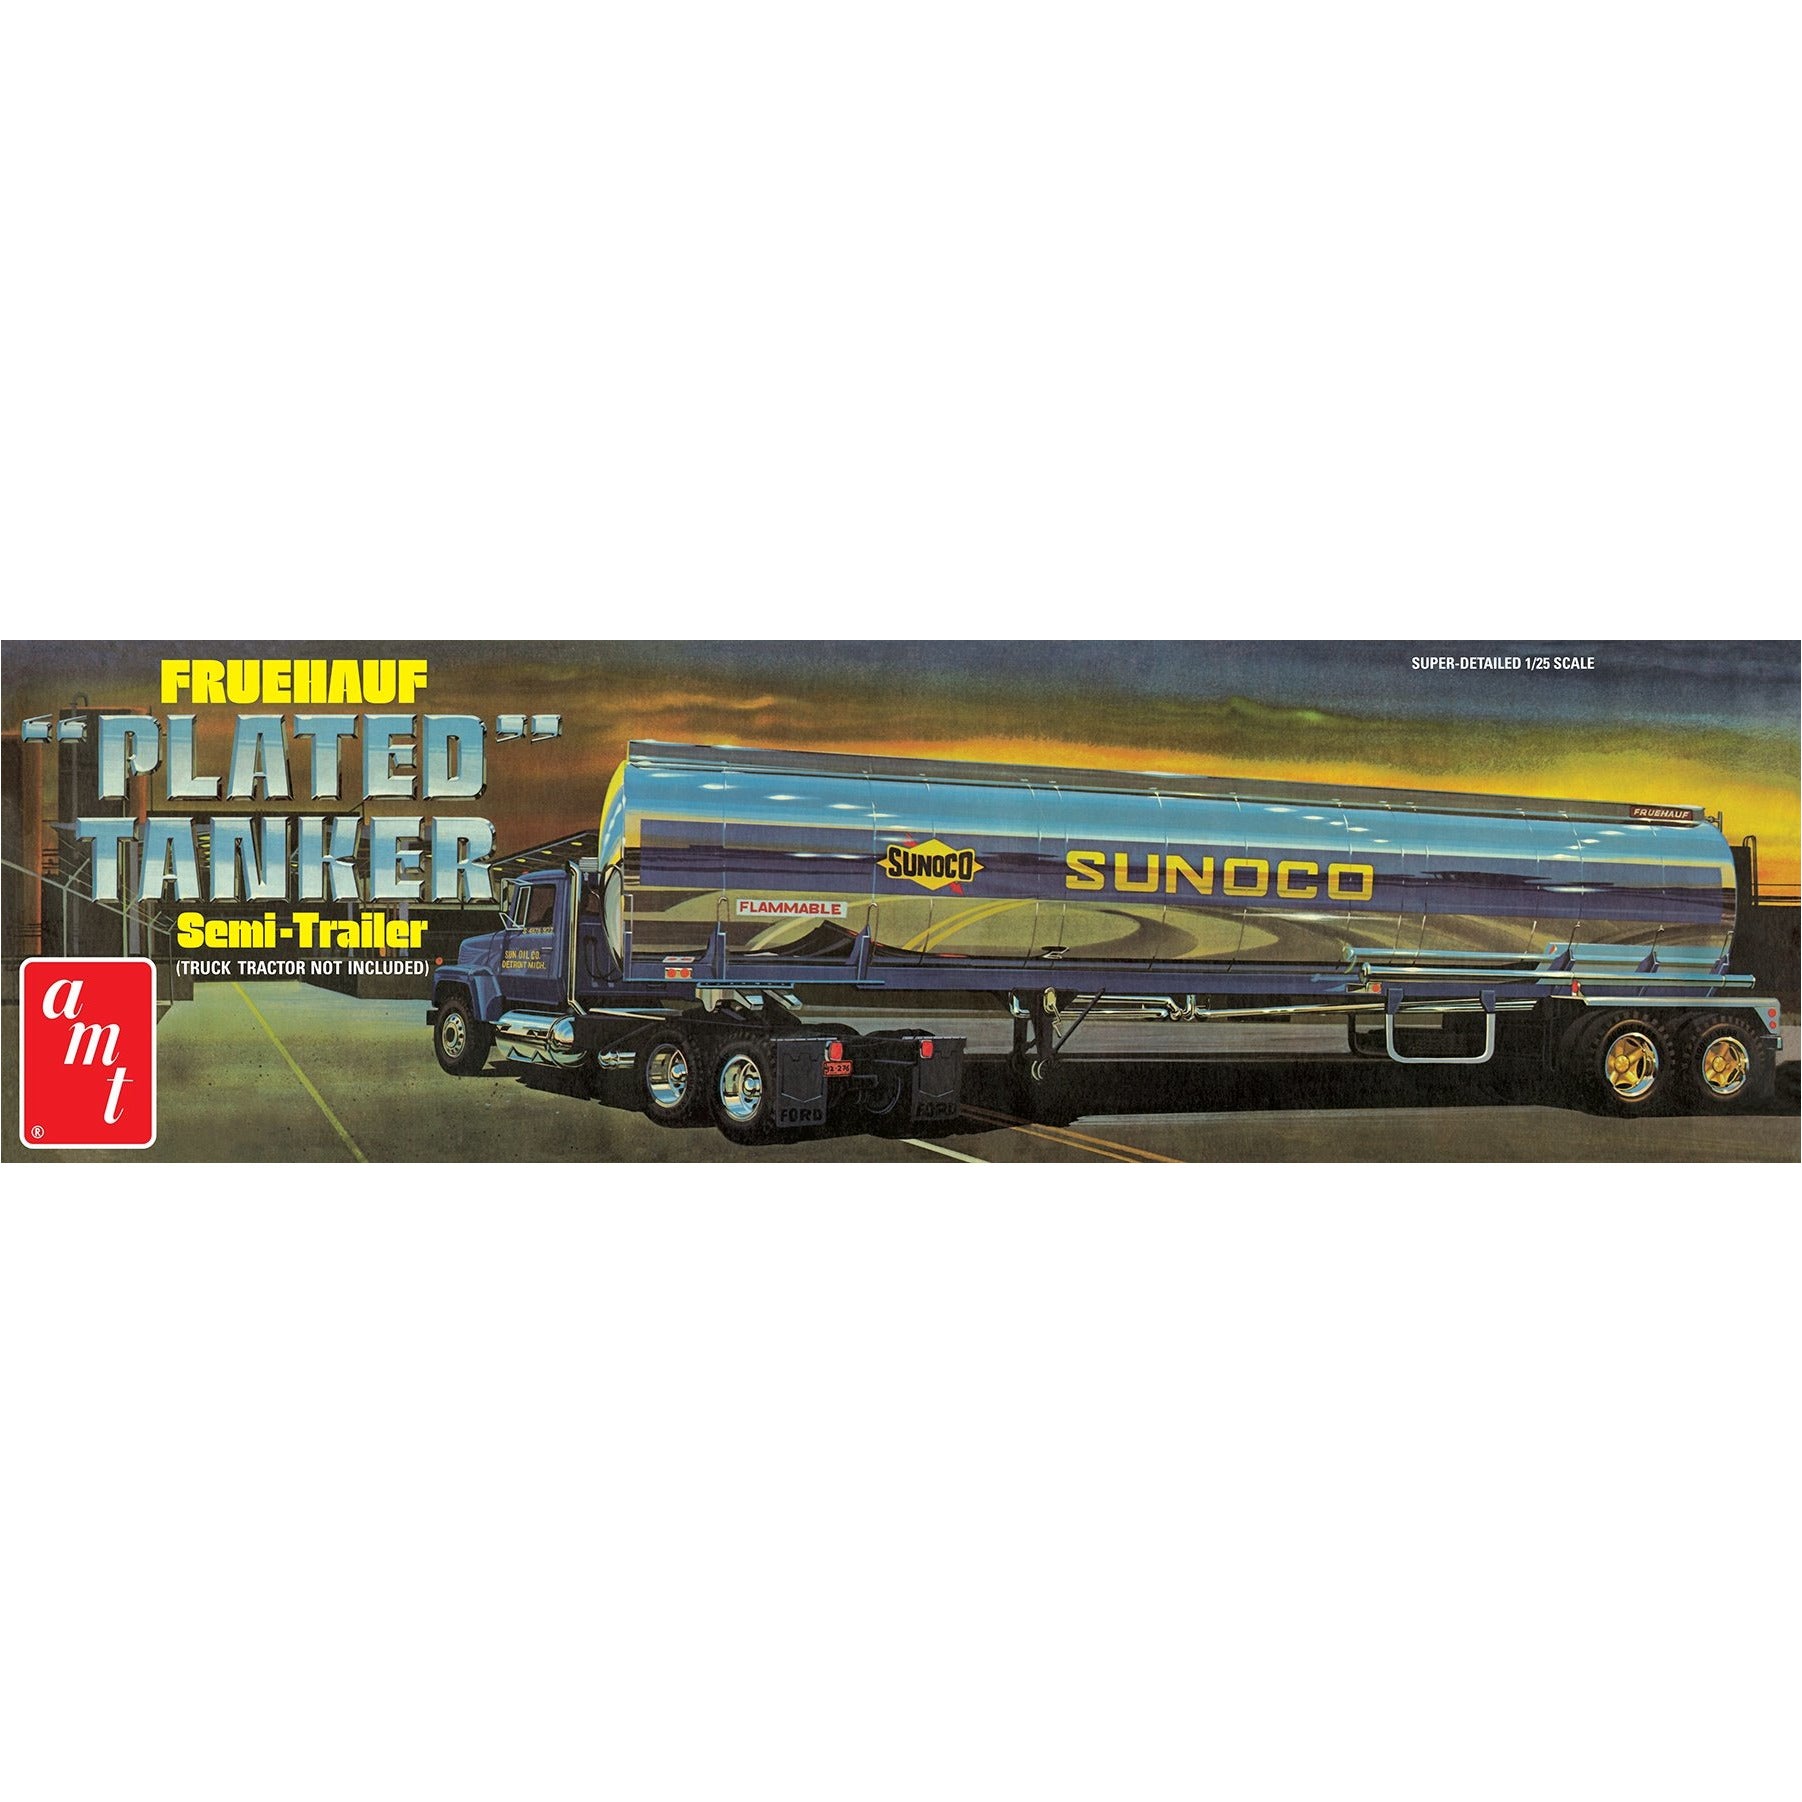 Frehauf "Plated" Tanker Semi-Trailer 1/25 #AMT1239/06 by AMT